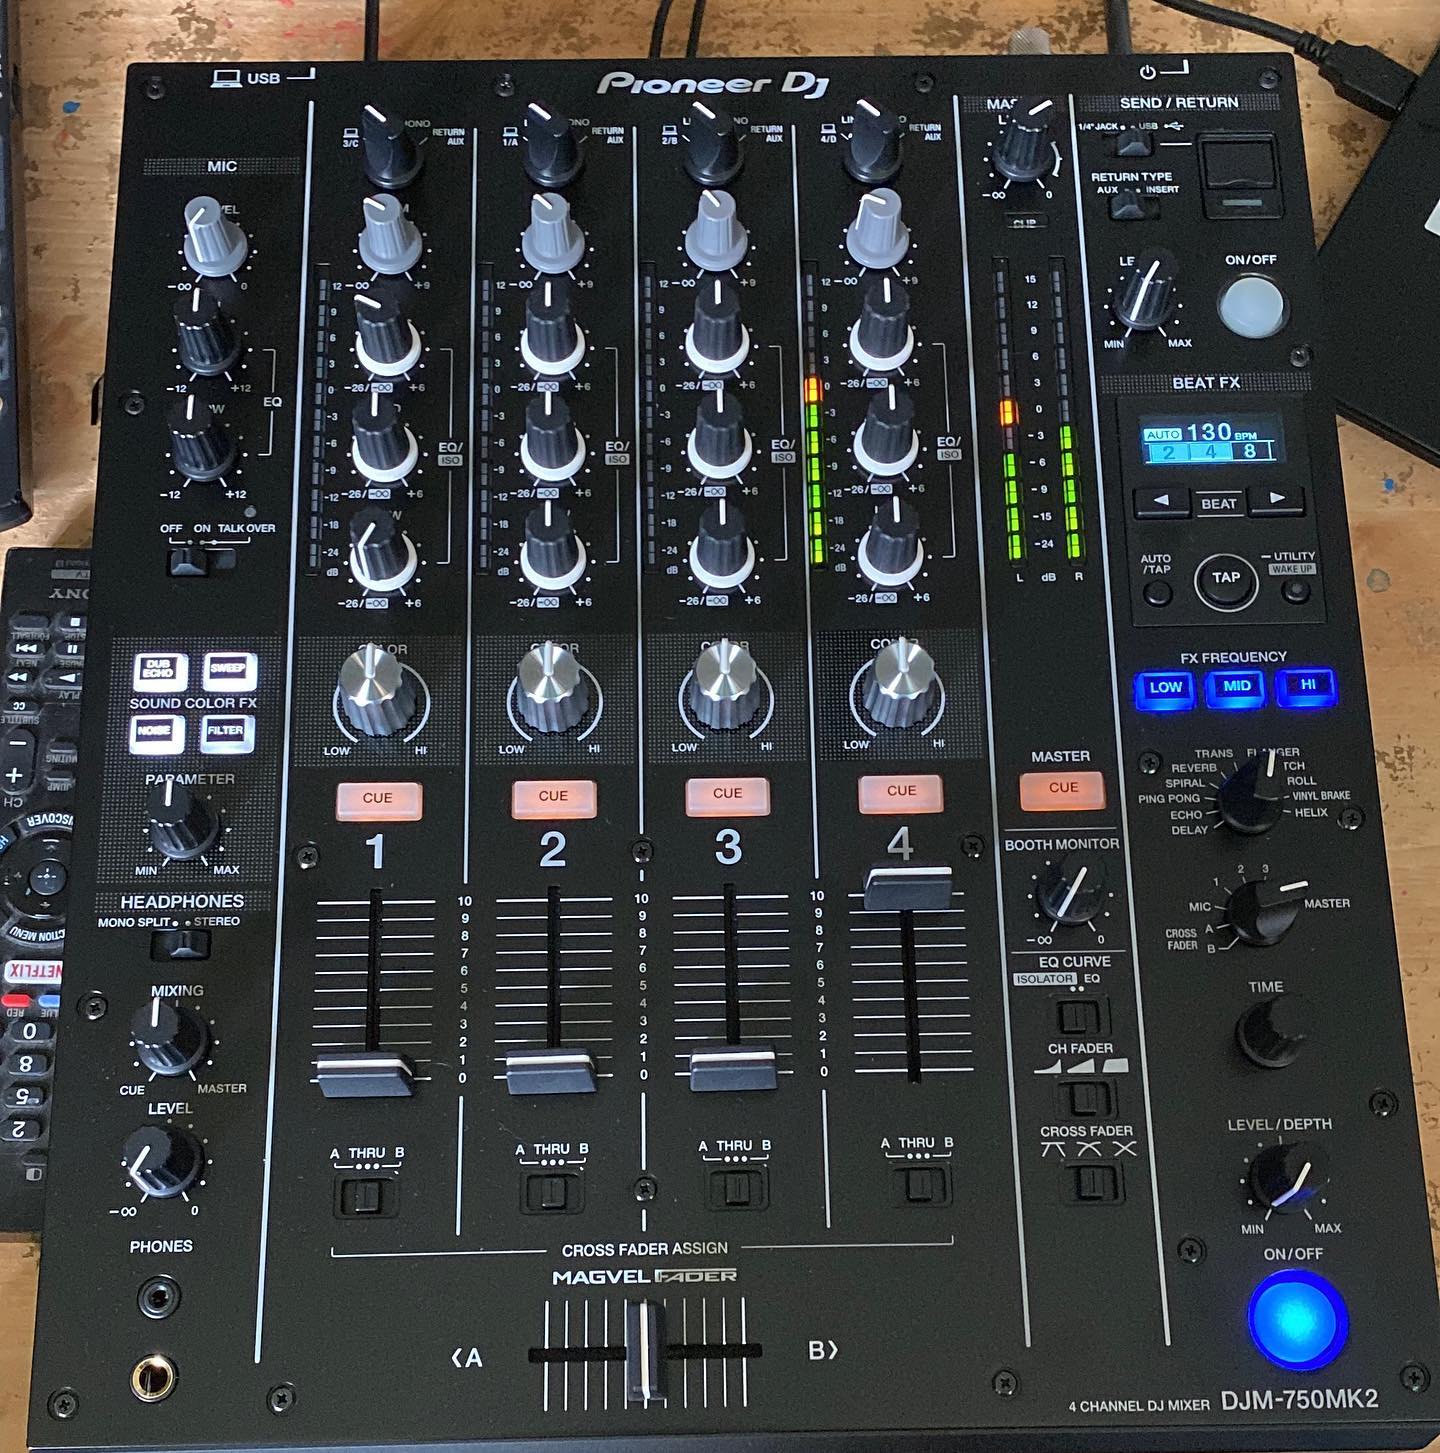 After two years of trying to find it in stock I finally got the mixer upgrade for my vinyl decks. Let’s hope it all fits on the table at @b.y.o.vinylnight now 🤣